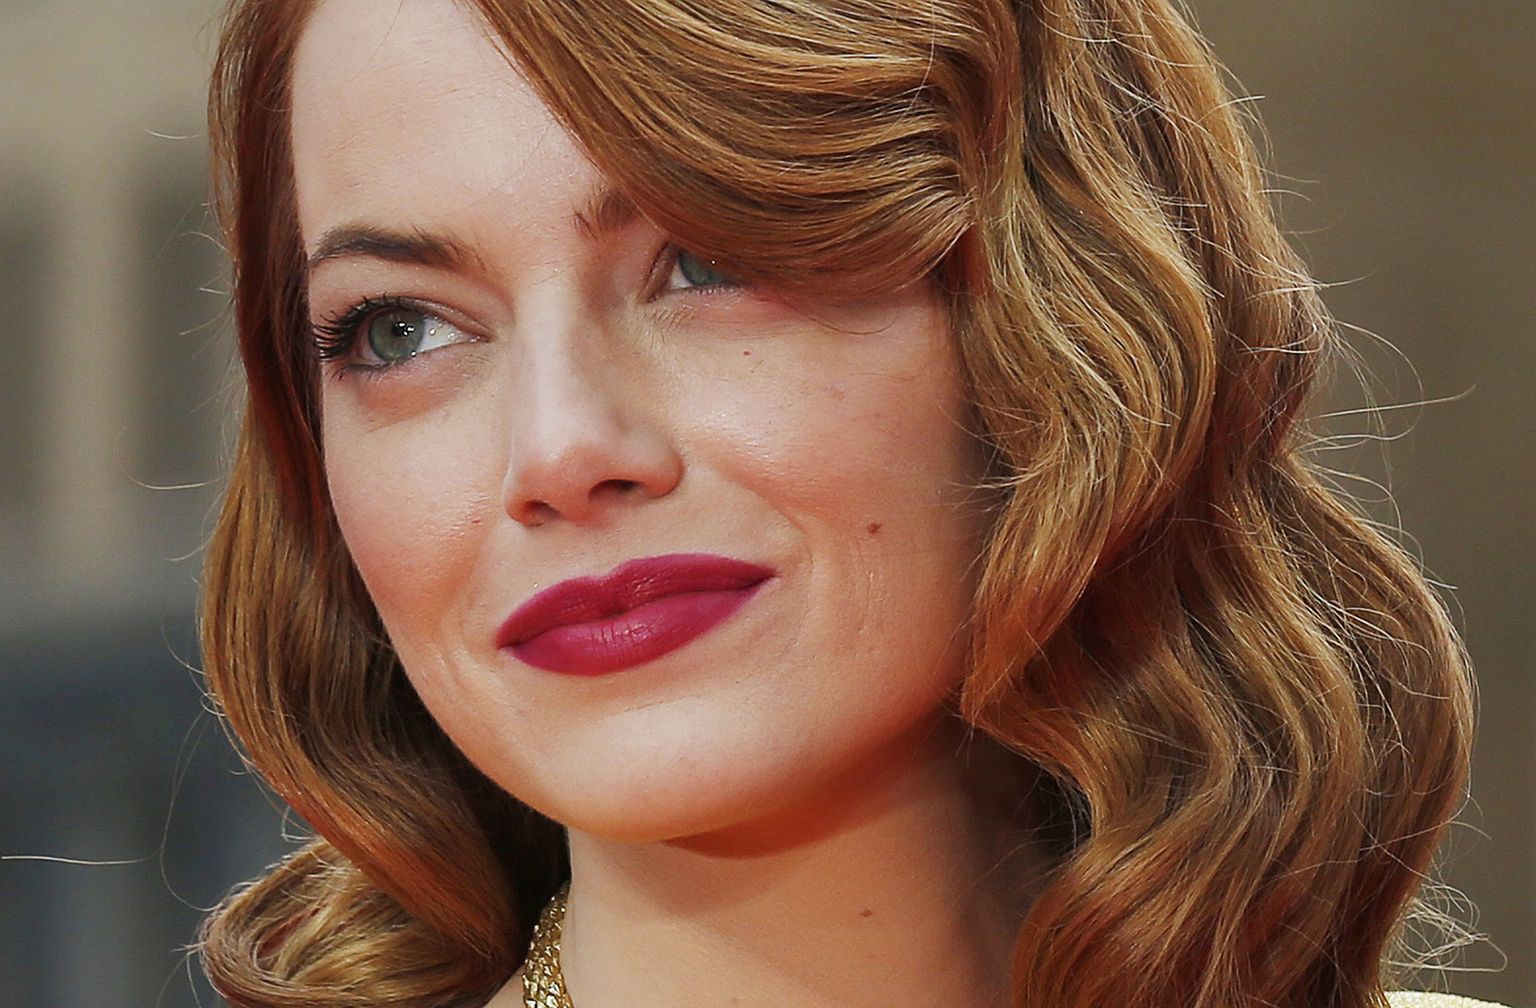 Actress Emma Stone arrives at the world premiere of The Amazing Spiderman 2 in central London, April 10, 2014. REUTERS/Olivia Harris (BRITAIN - Tags: ENTERTAINMENT)